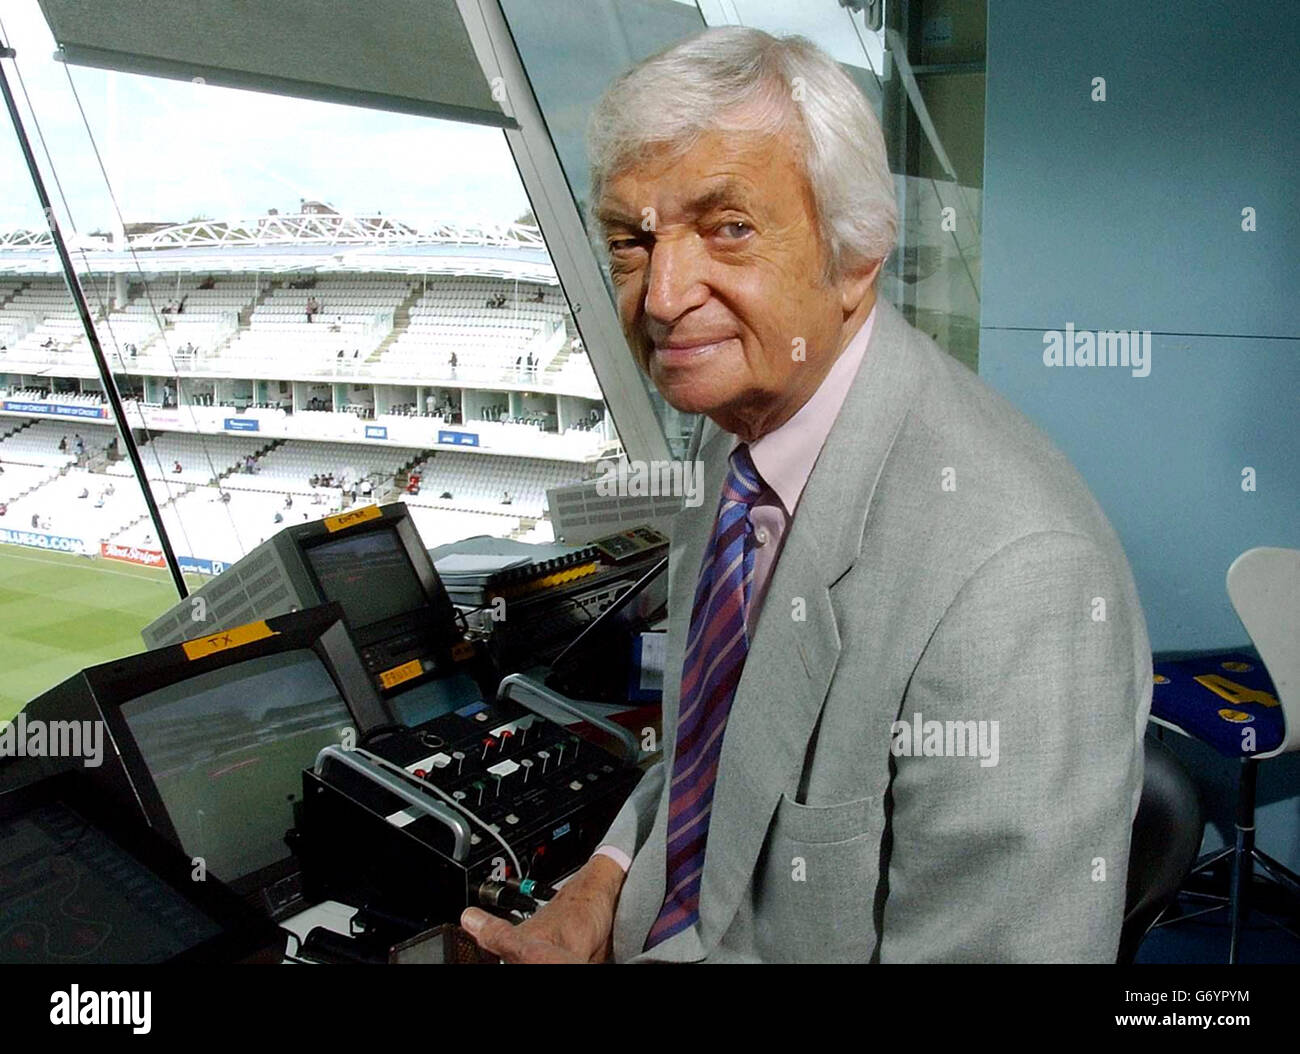 Channel 4 cricket presenter Richie Benaud in his commentary box its his 500th test as a player/presenter at Lords. Stock Photo